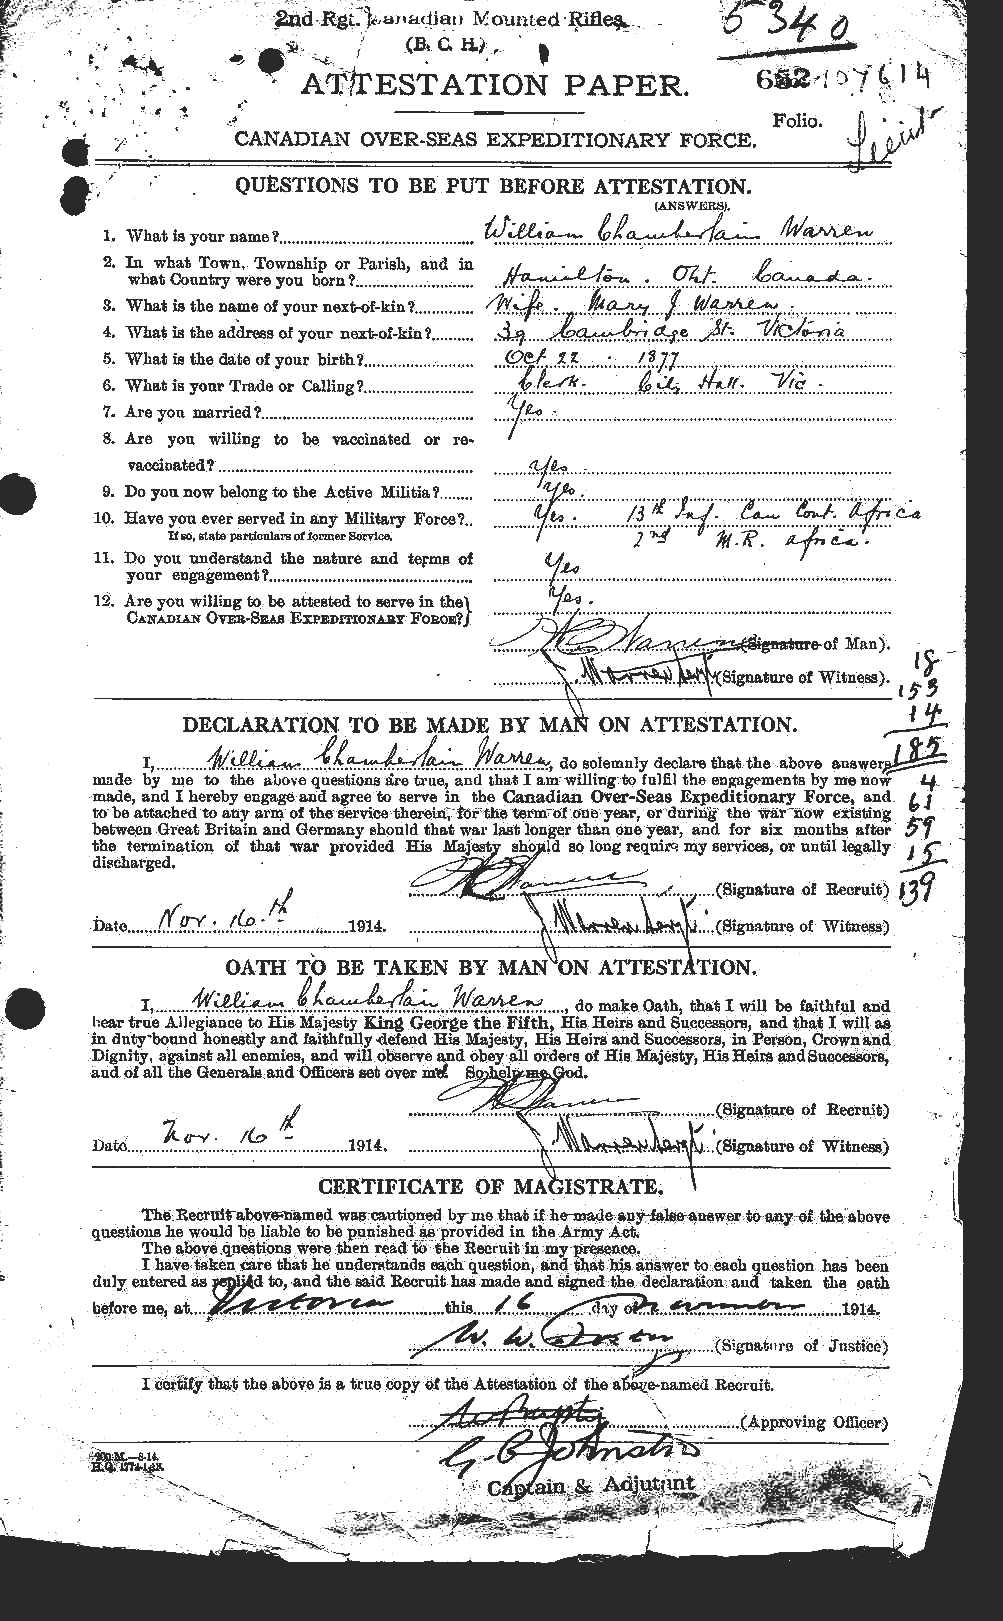 Personnel Records of the First World War - CEF 658681a